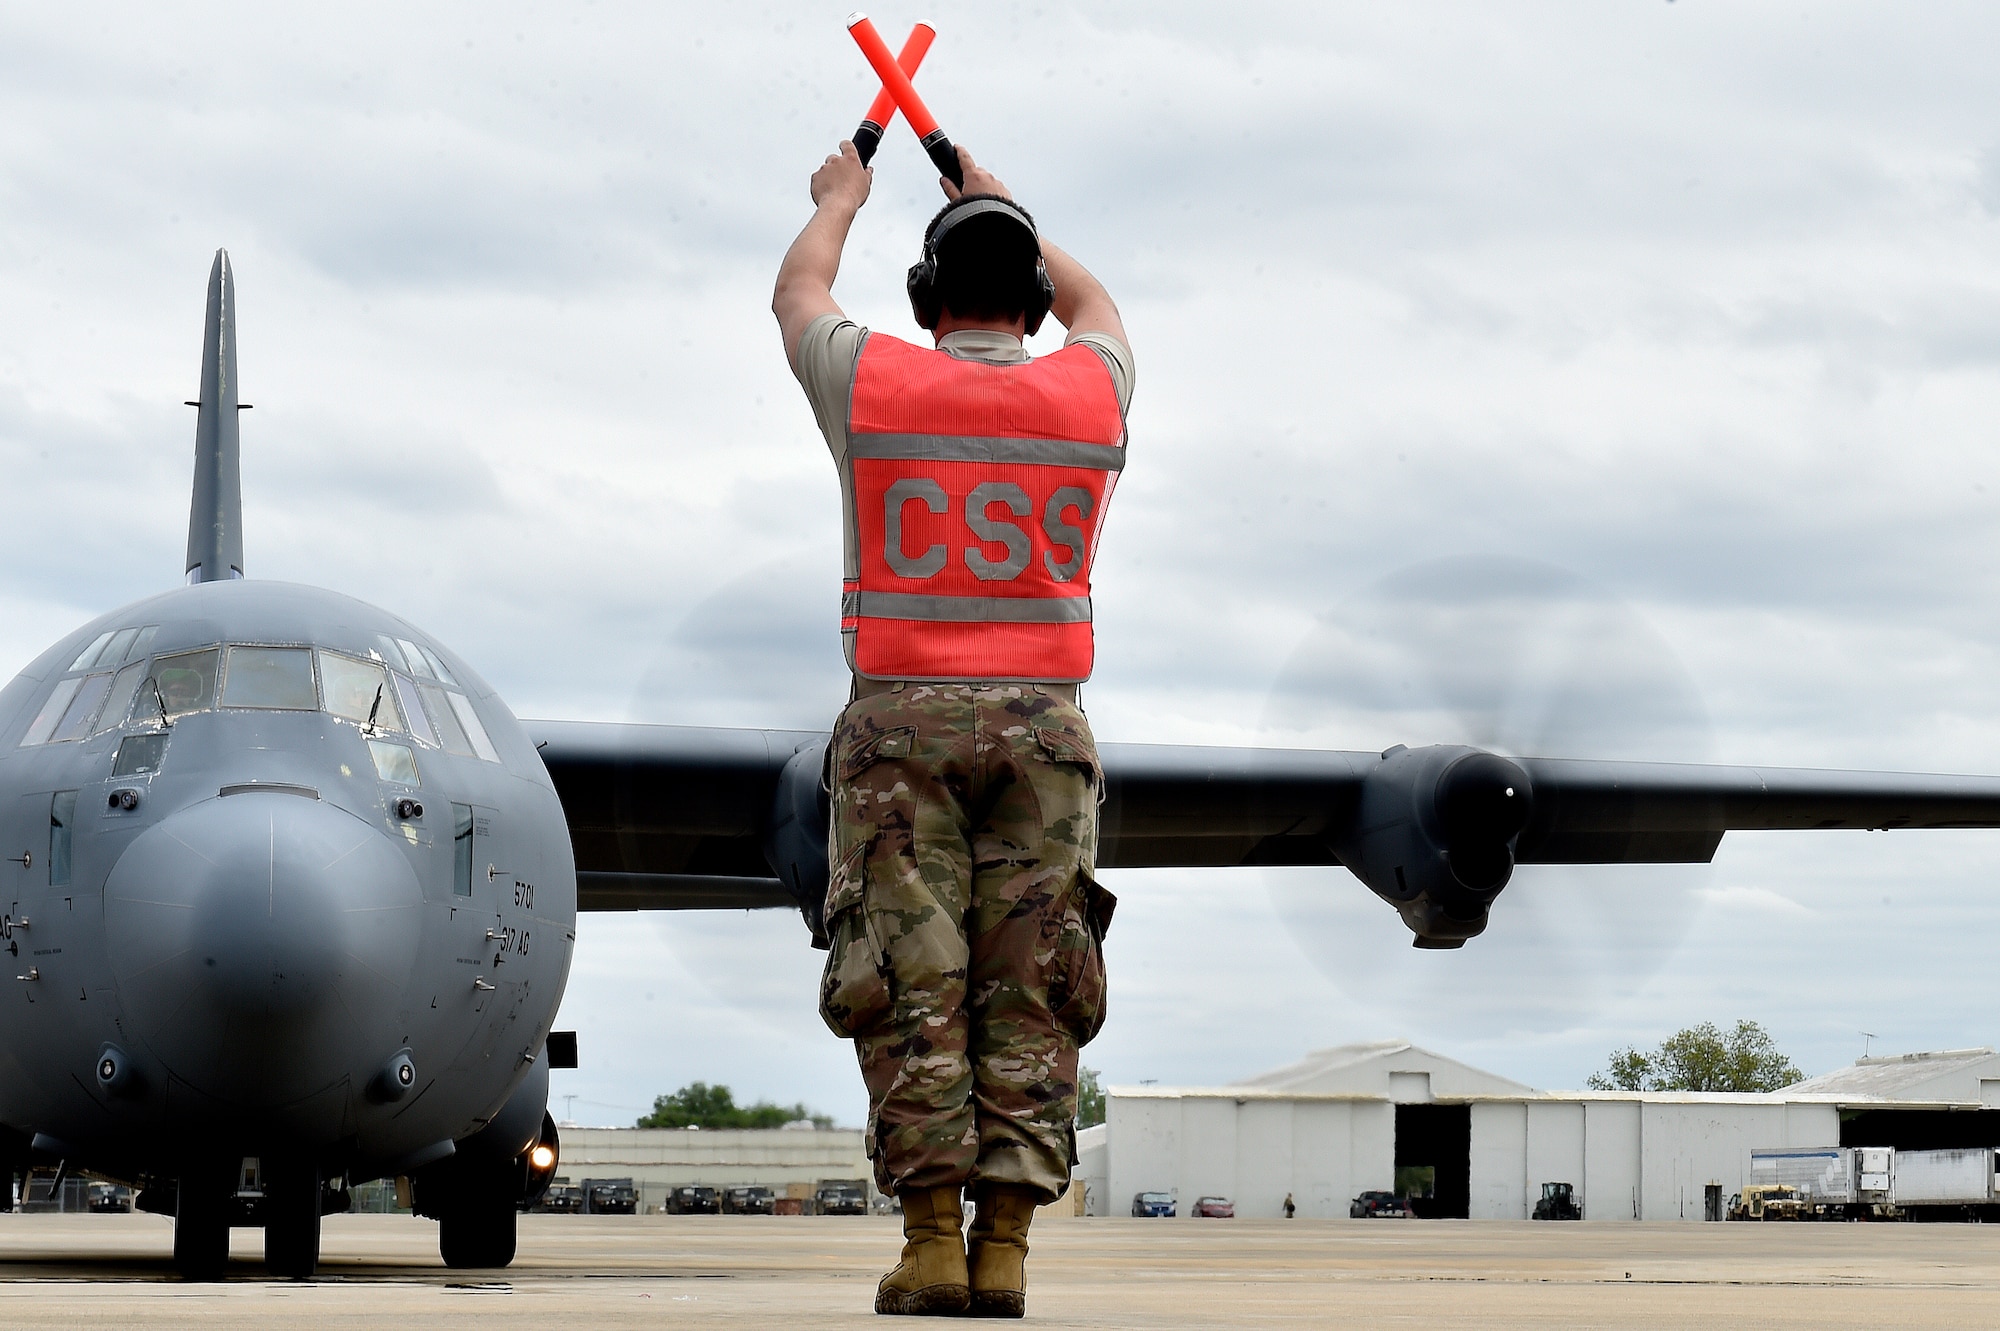 Senior Airman Adan Solis, 921st Contingency Response Squadron aircraft maintainer, marshals a C-130 Hercules aircraft during the Joint Readiness Training Center exercise, April 9, 2018, at the Alexandria International Airport, La. Contingency Response Airmen conducted joint training with Soldiers from the 2nd Brigade Combat Team, 82nd Airborne Division, providing direct air-land support for safe and efficient airfield operations. (U.S. Air Force photo by Tech. Sgt. Liliana Moreno/Released)